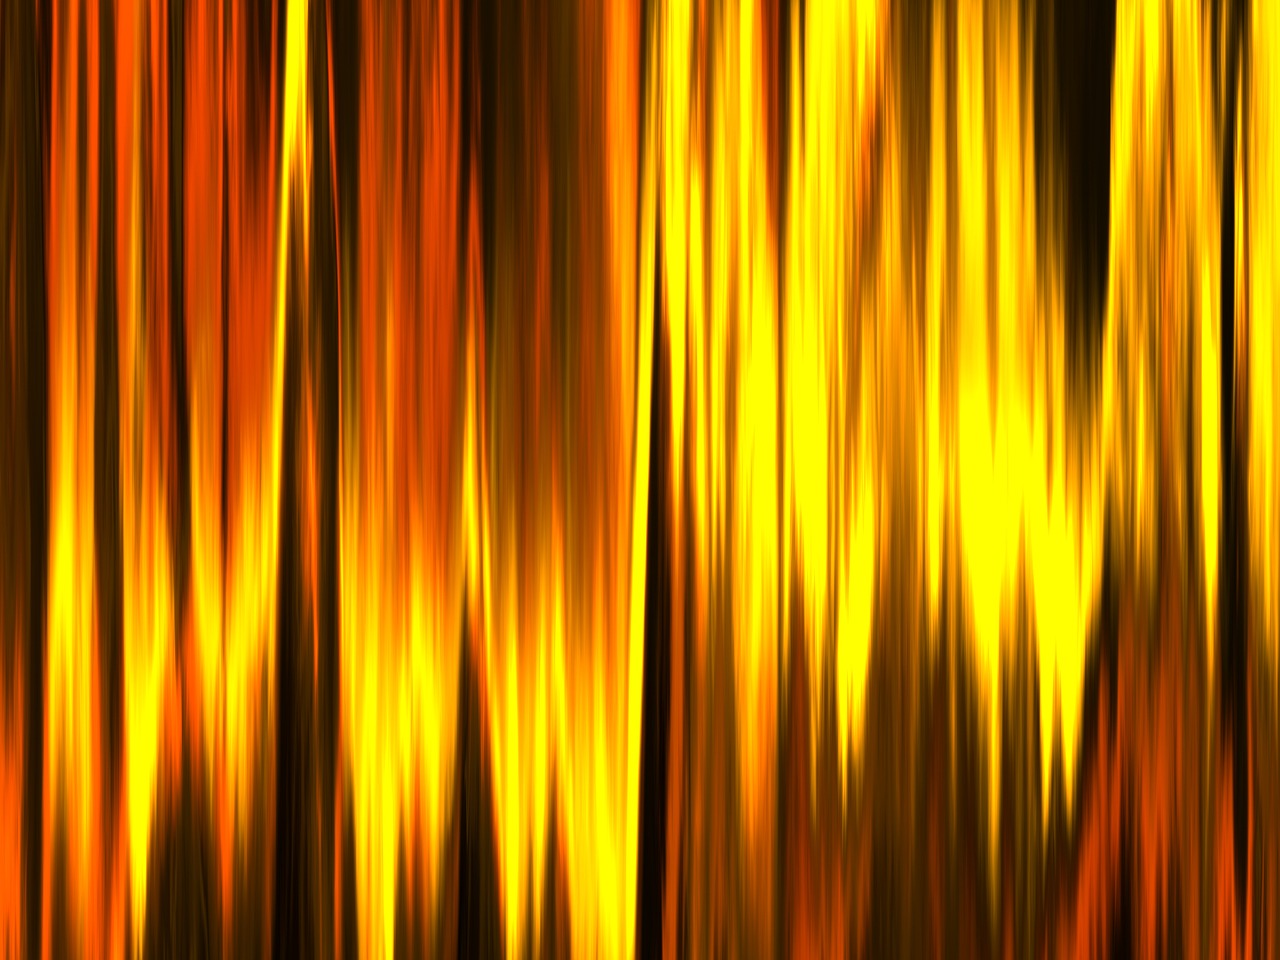 a blurry image of a forest at night, a digital rendering, inspired by Lorentz Frölich, lyrical abstraction, golden fabric background, the matrix servers on fire, yellow background beam, vertical lines